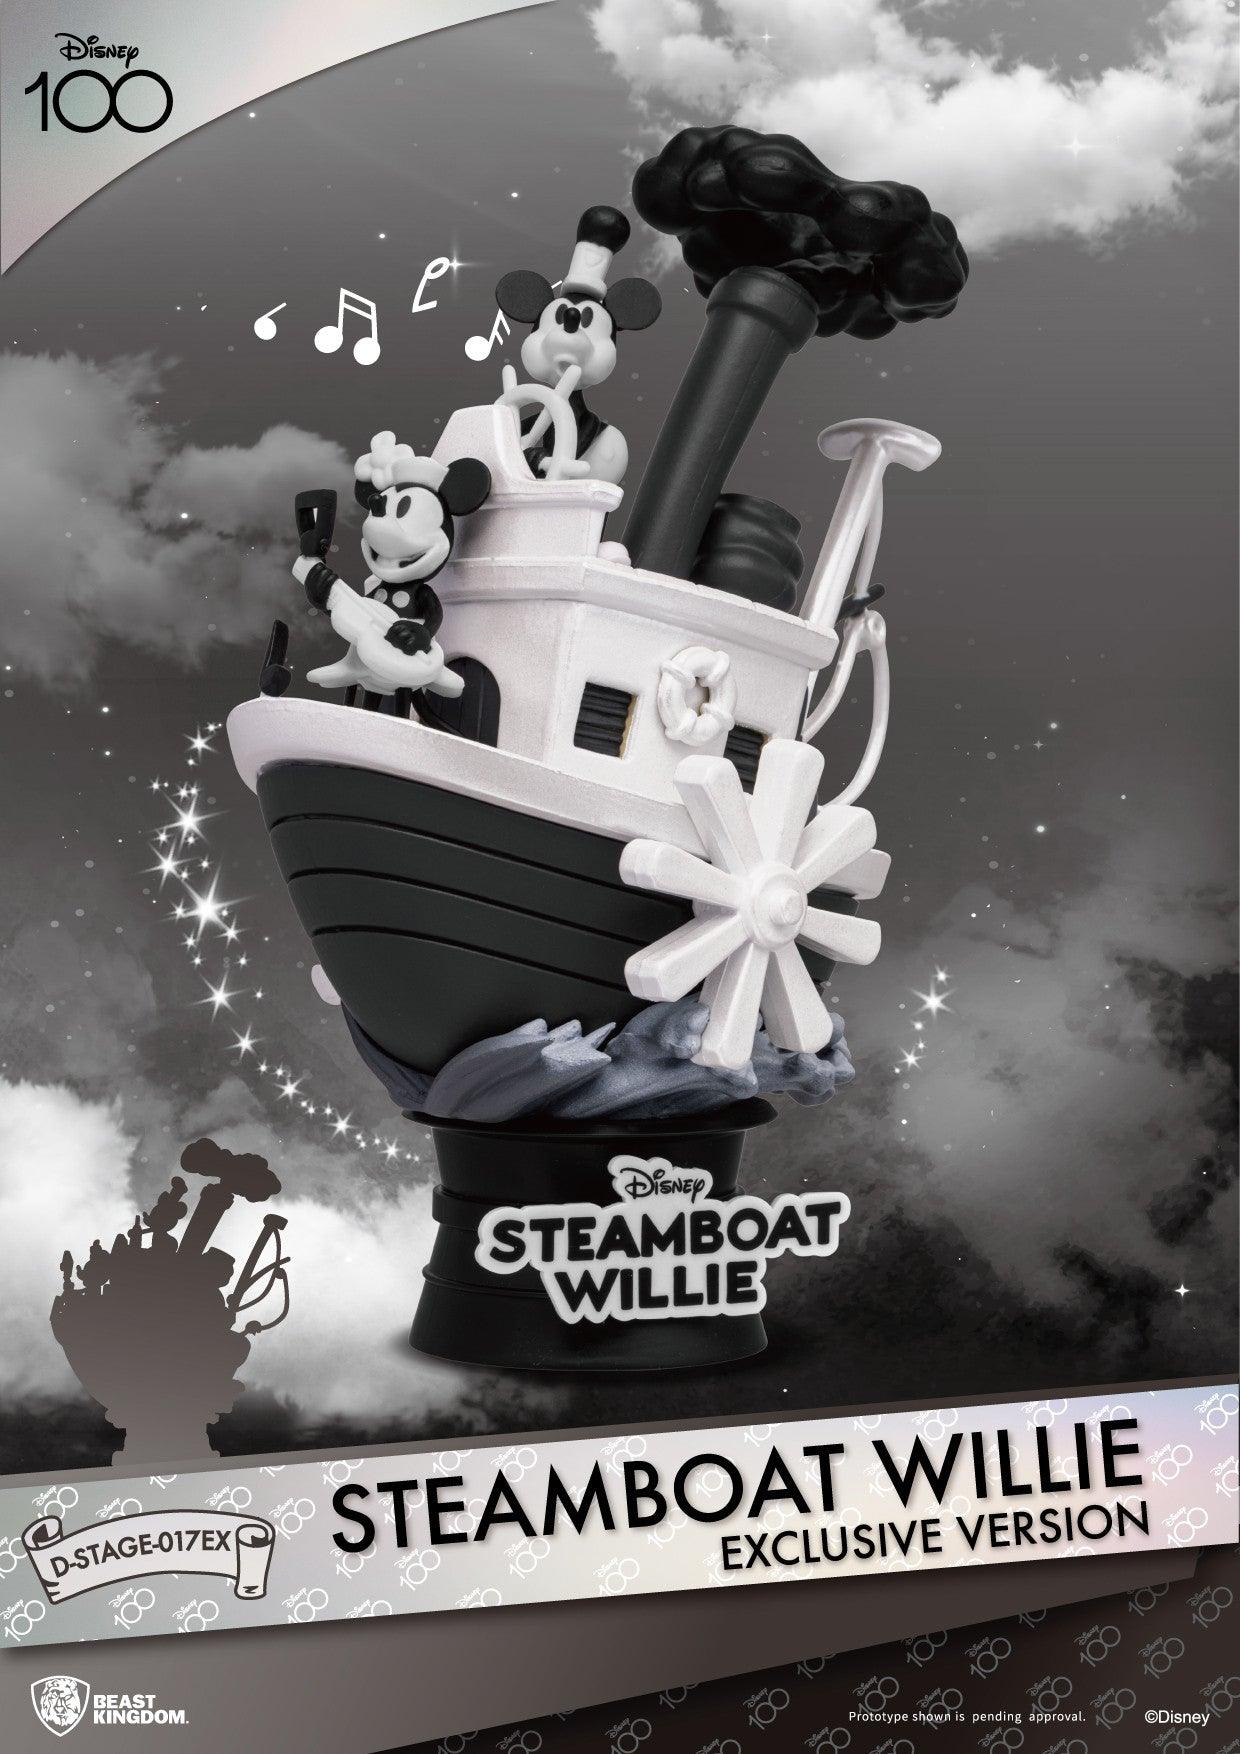 VR-115726 Beast Kingdom D Stage Disney Steamboat Willie Mickey and Minnie Mouse Exclusive Version - Beast Kingdom - Titan Pop Culture